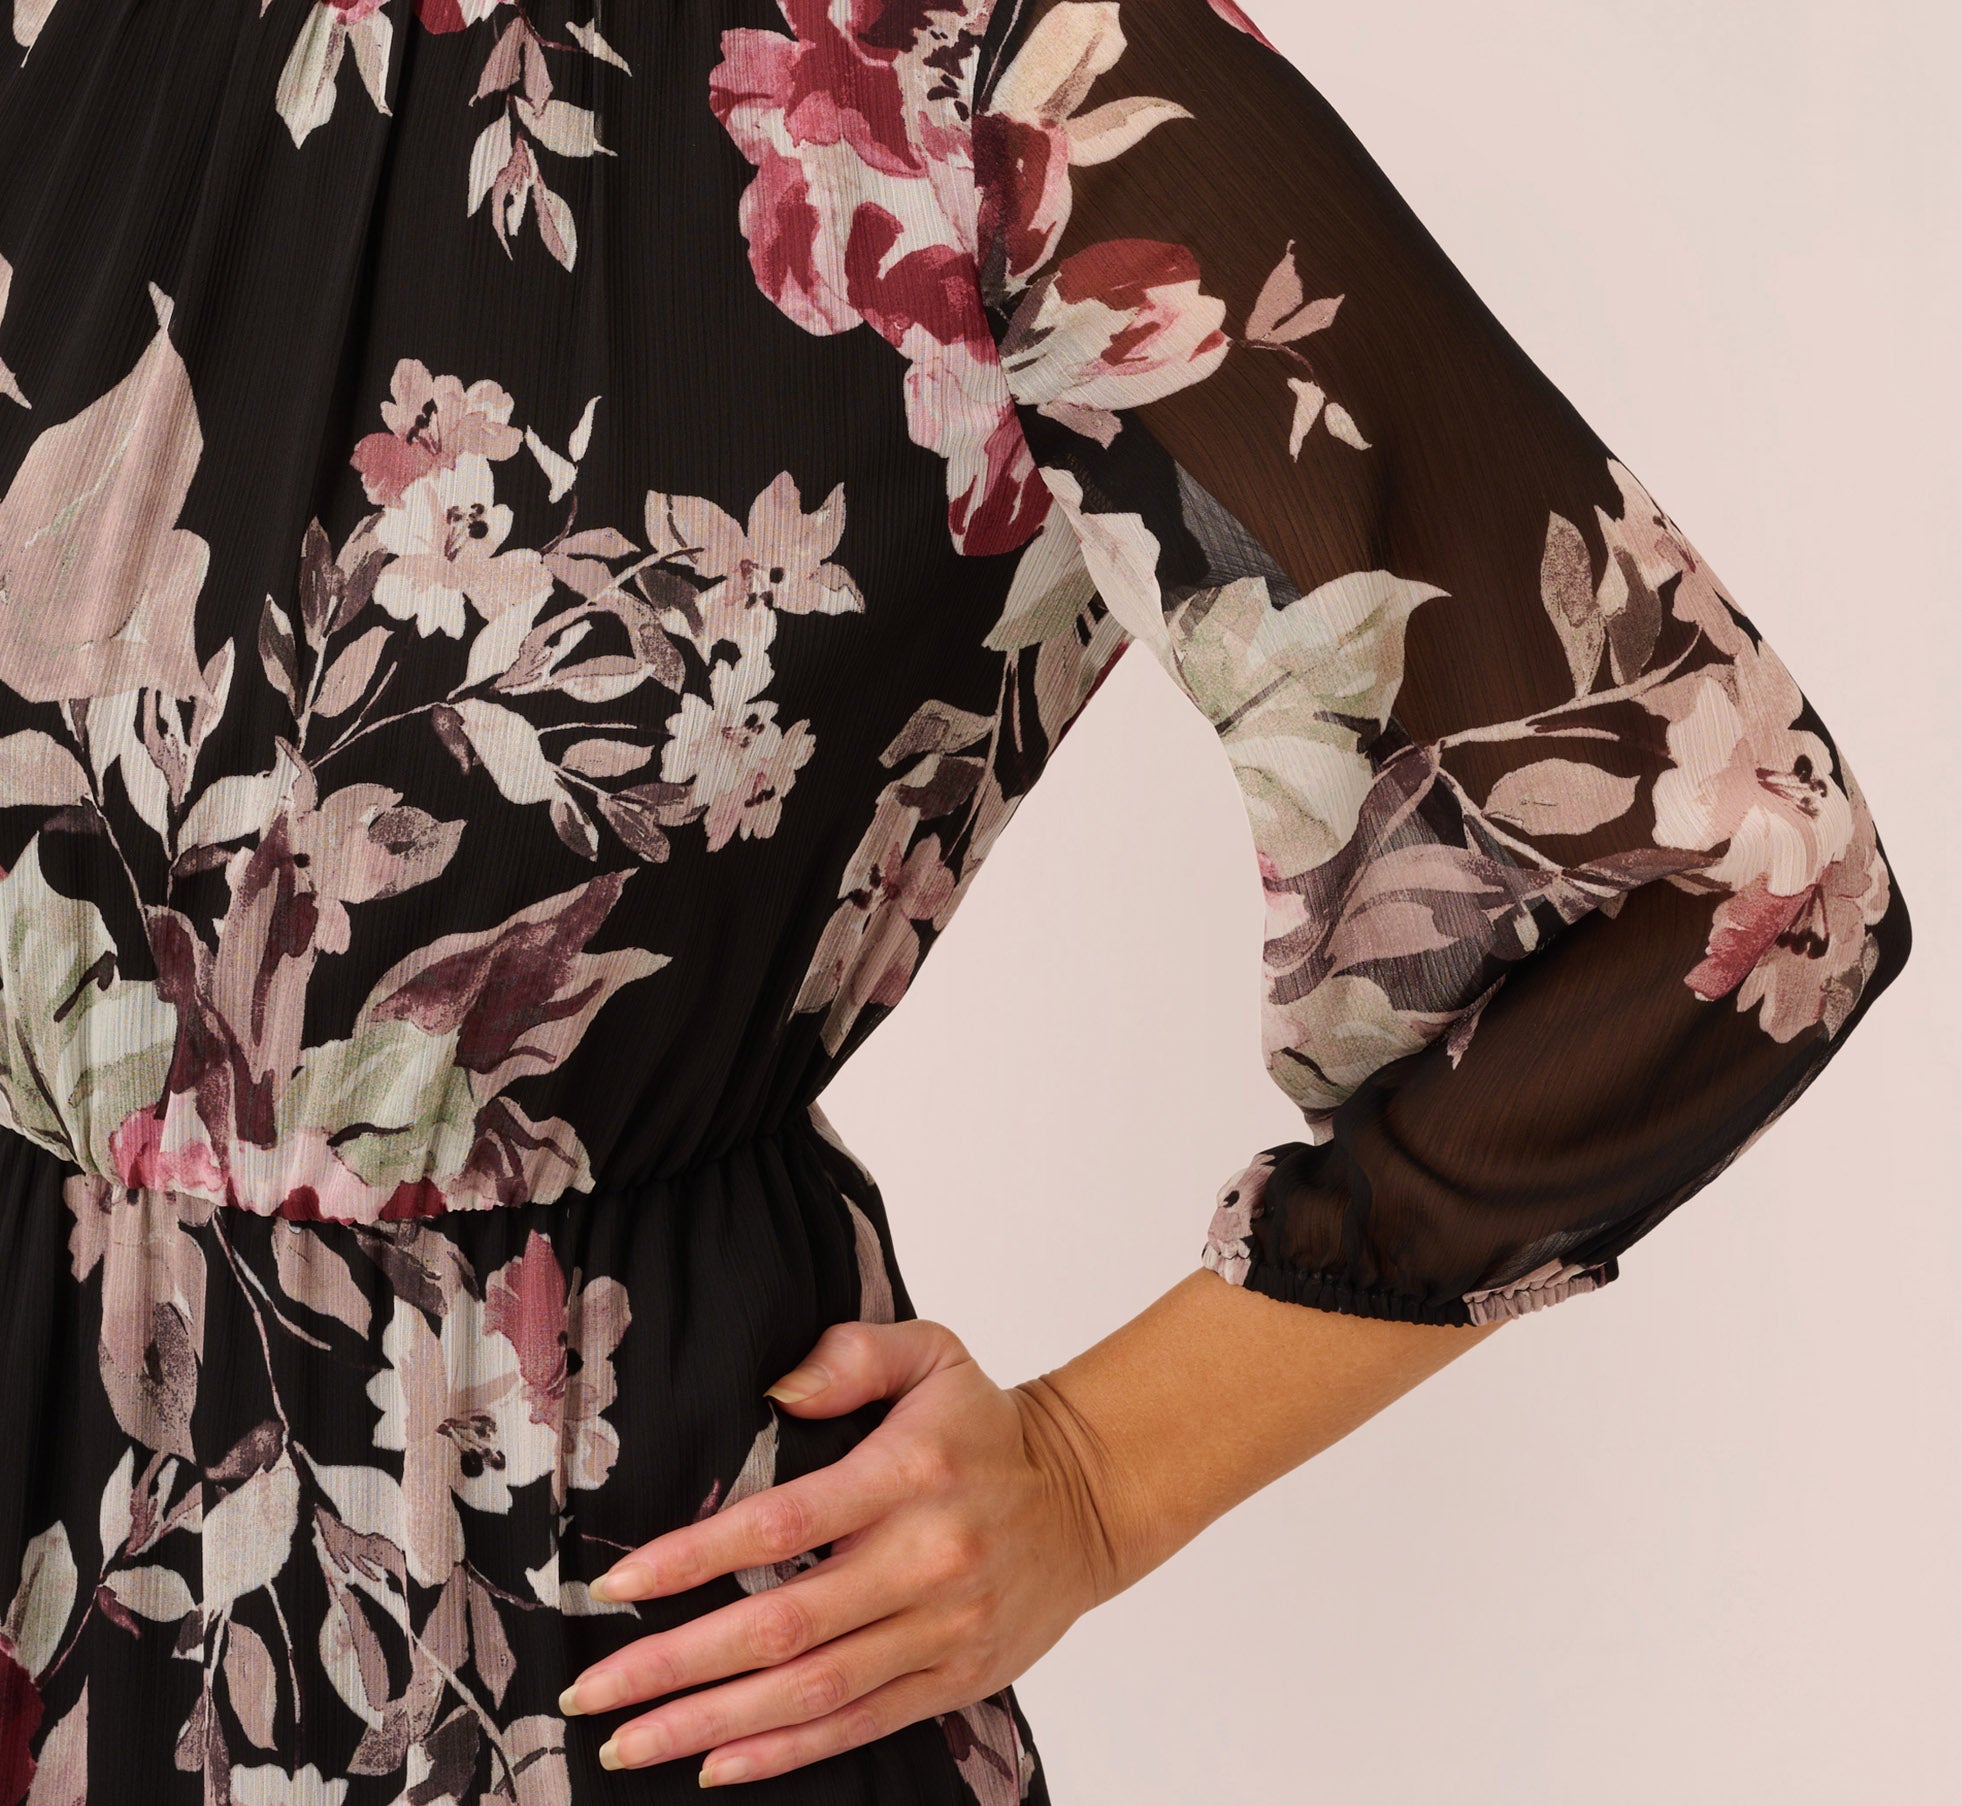 Floral Chiffon Dress With Three Quarter Length Sleeves In Black